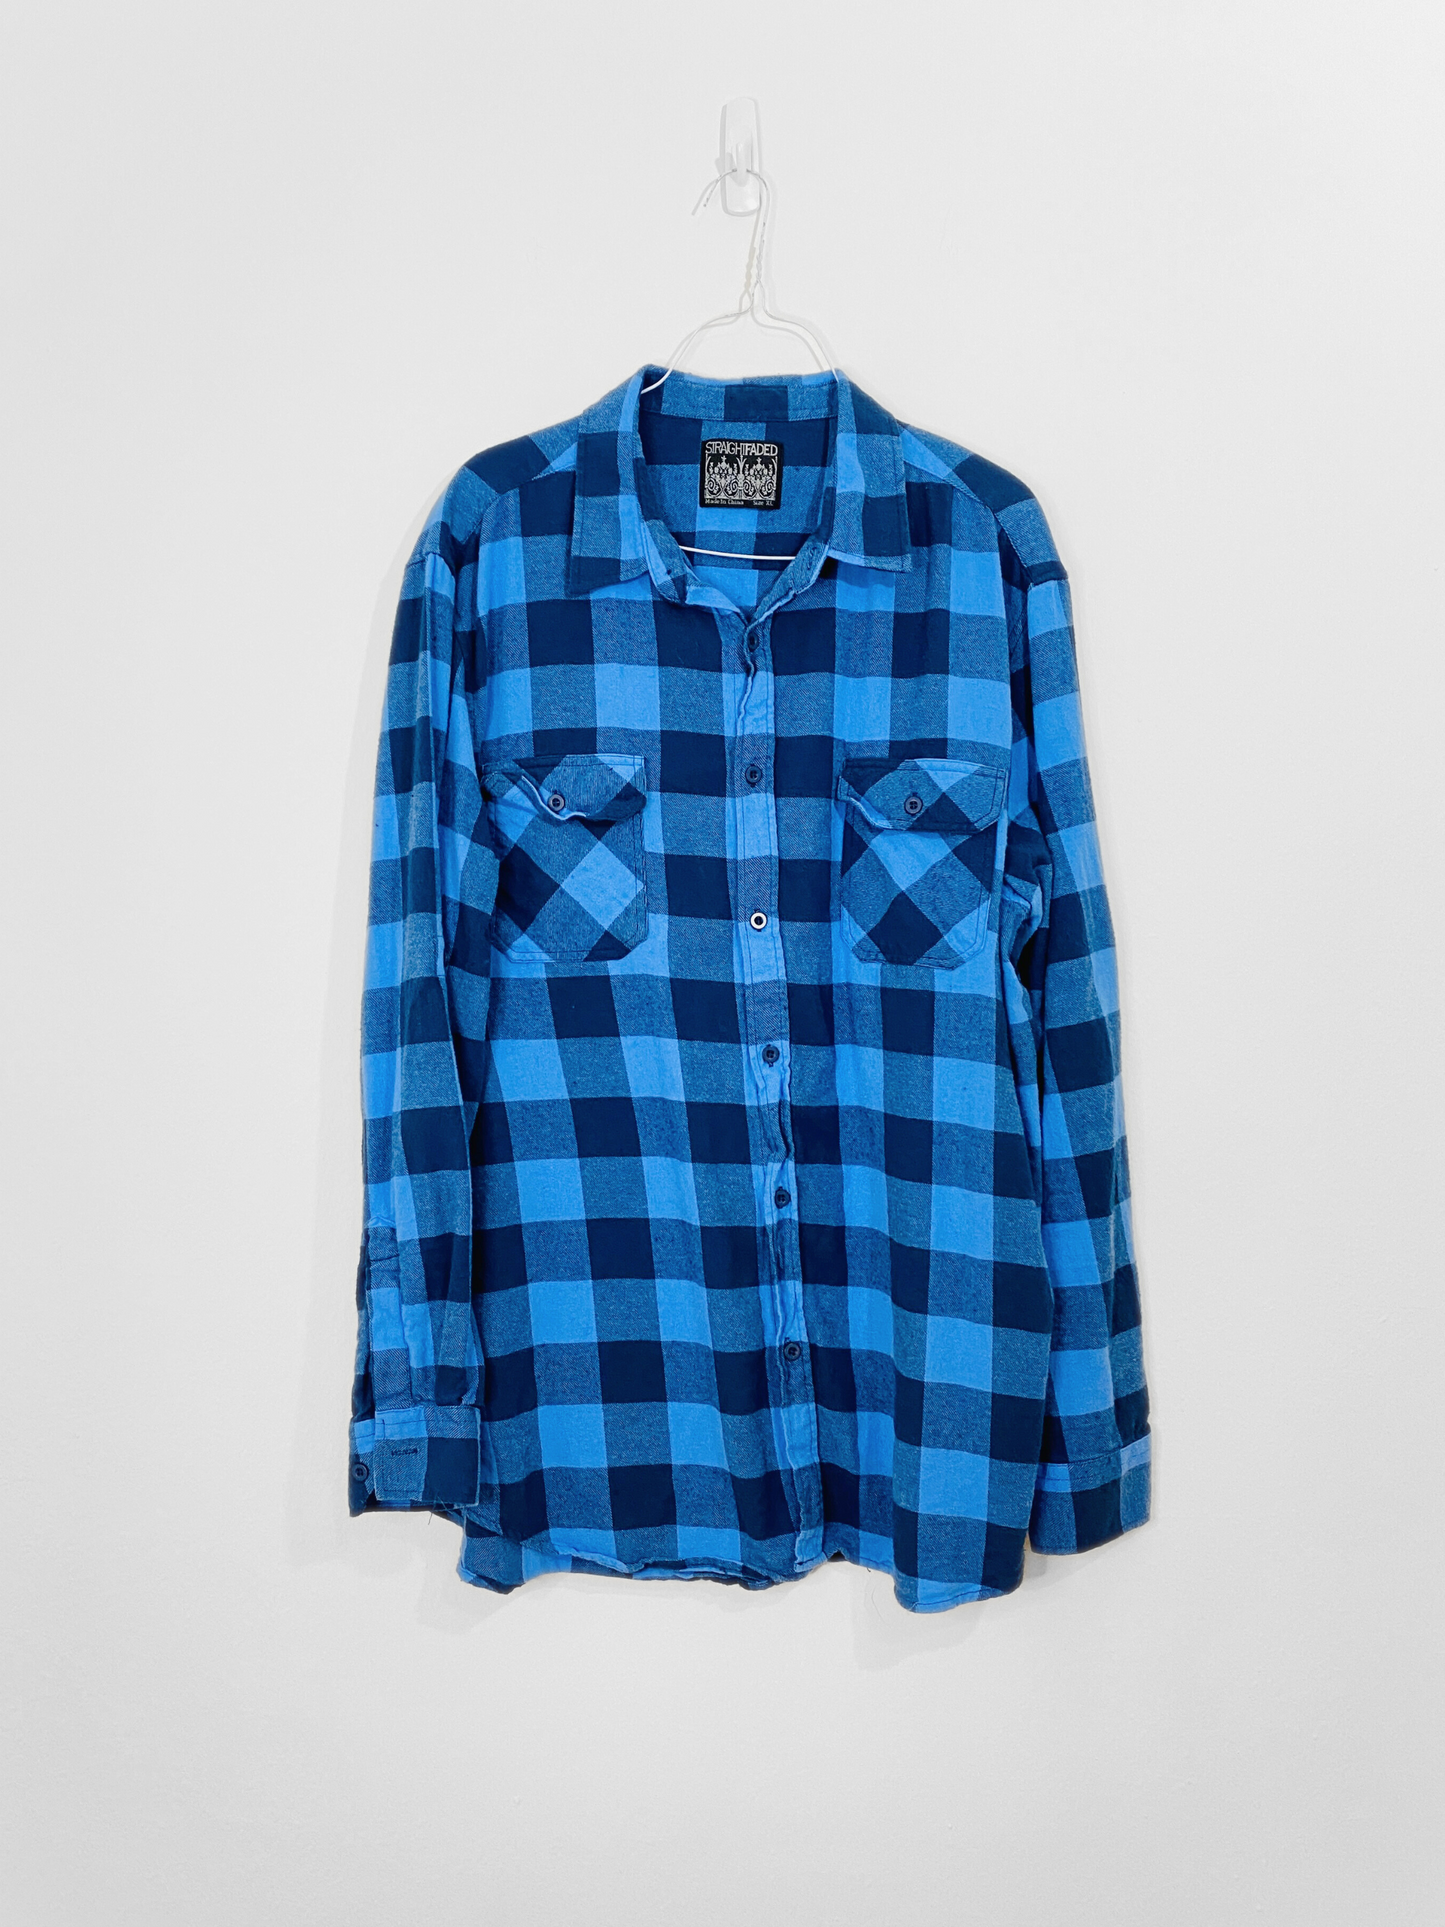 Blue and Black Flannel Shirt (XL)